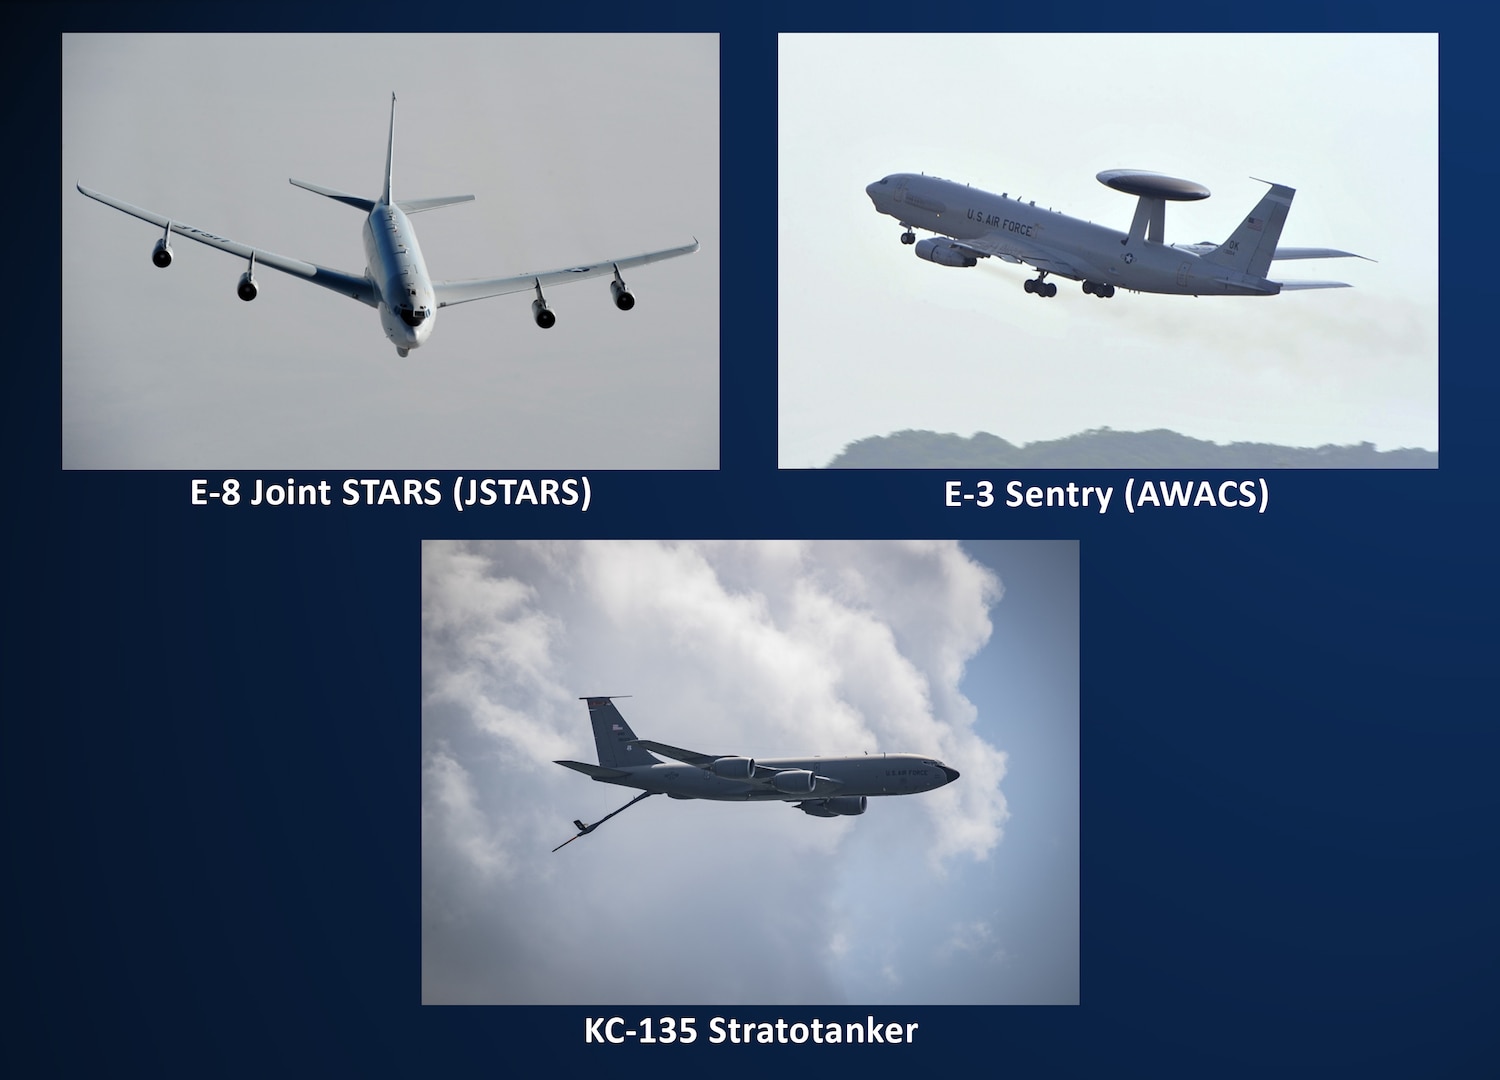 An E-3 Sentry (AWACS) and E-8 Joint STARS (JSTARS), and a KC-135 Stratotanker aerial refueling aircraft.